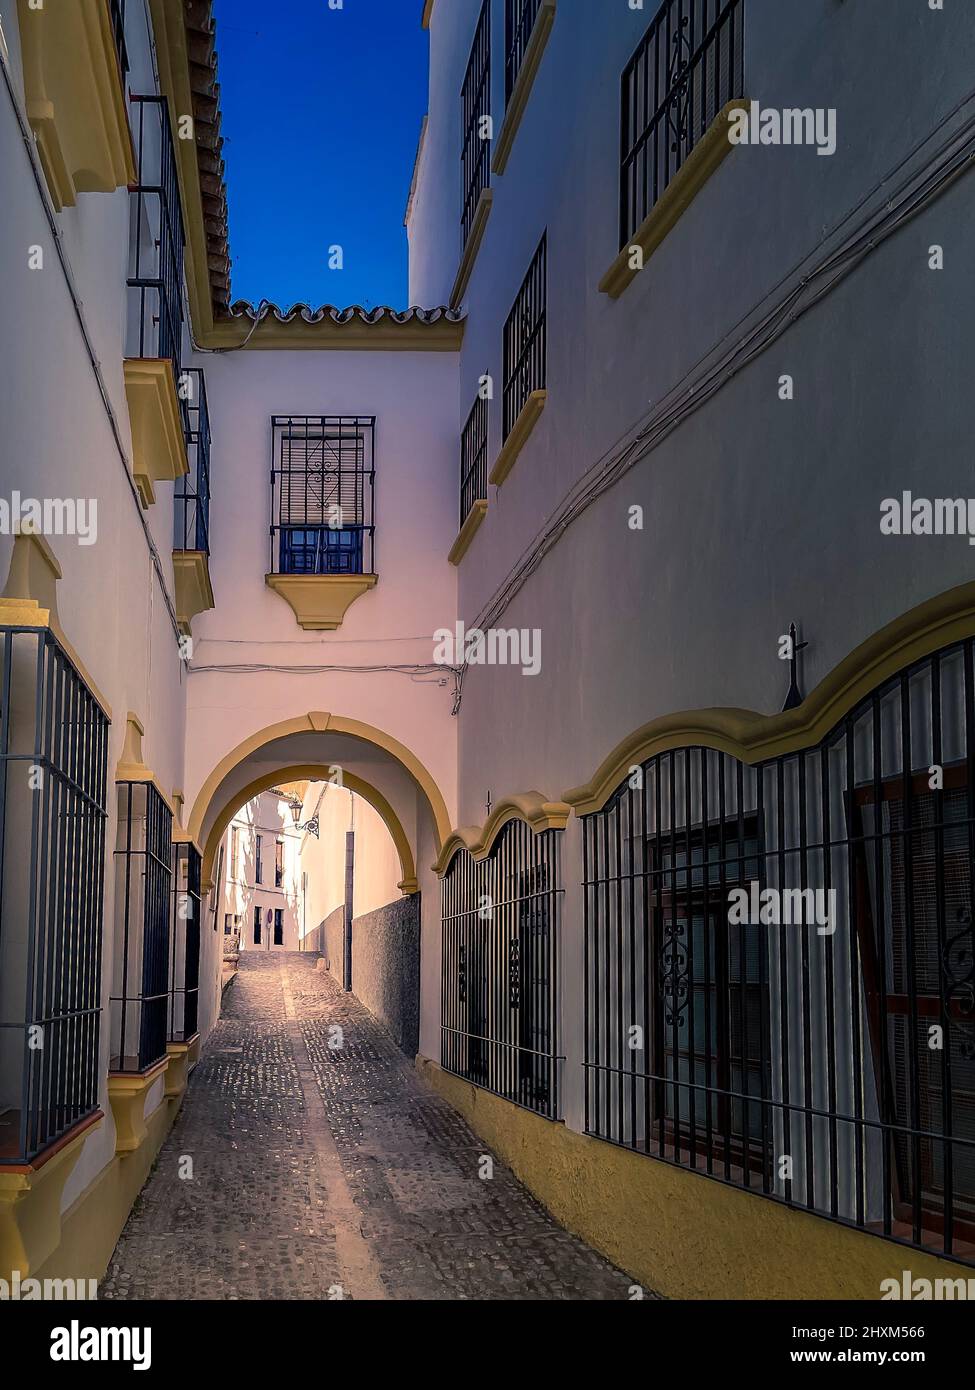 Ronda, Andalucia, Spain. Beautiful dreamy alley in the Old Town of Ronda city, in the Andalucia region, part of the famous White Villages. Stock Photo